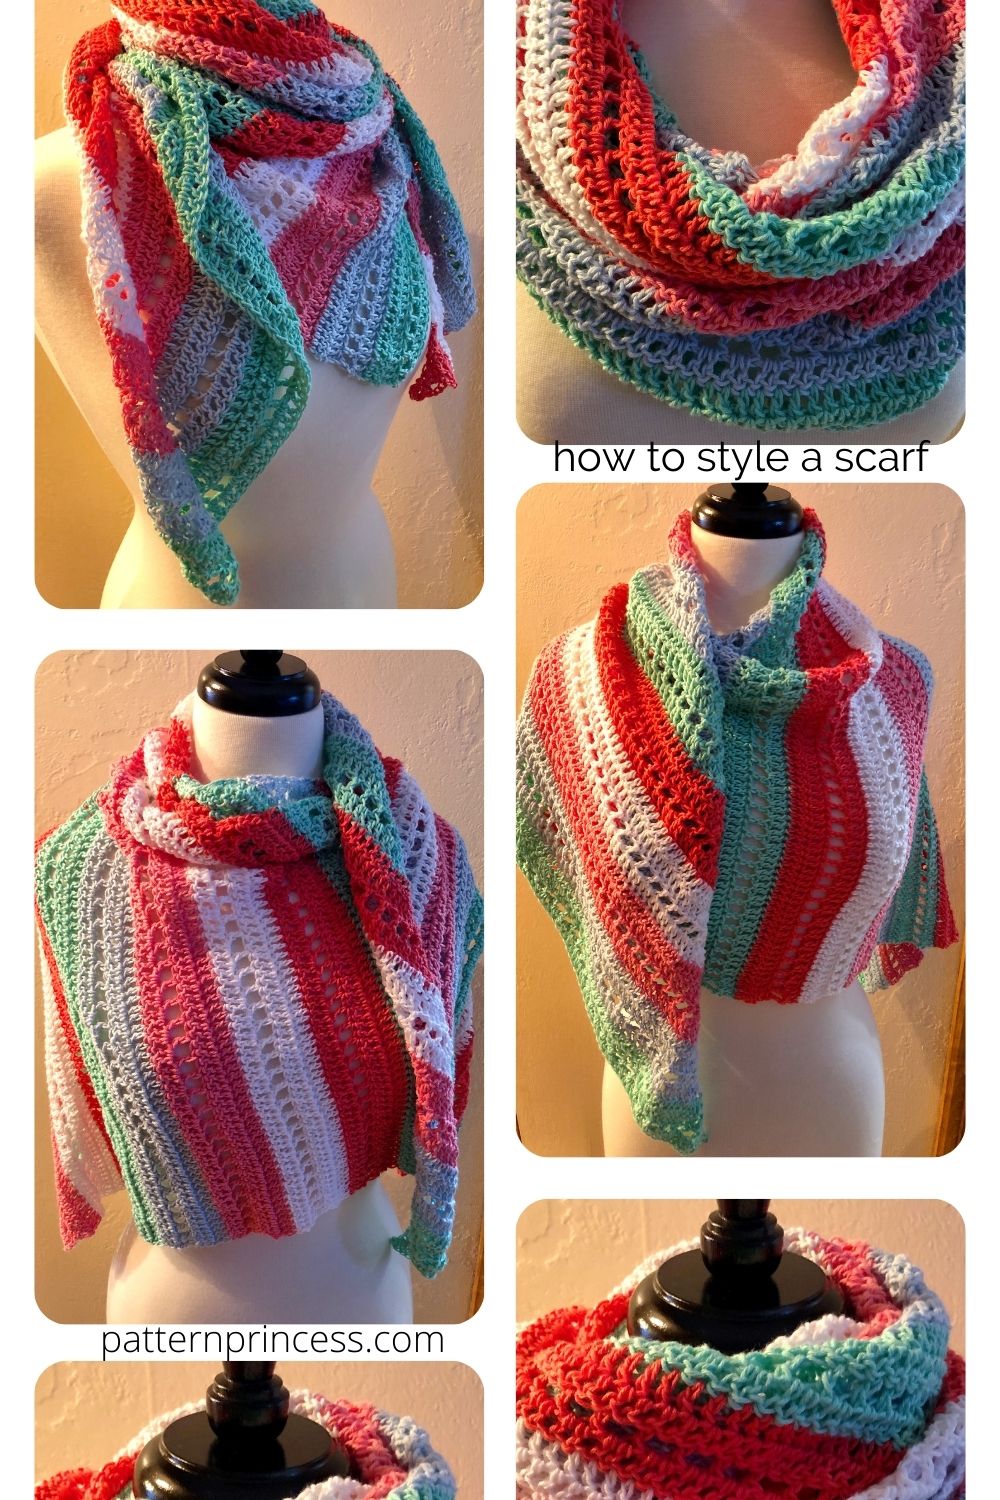 How to style a scarf